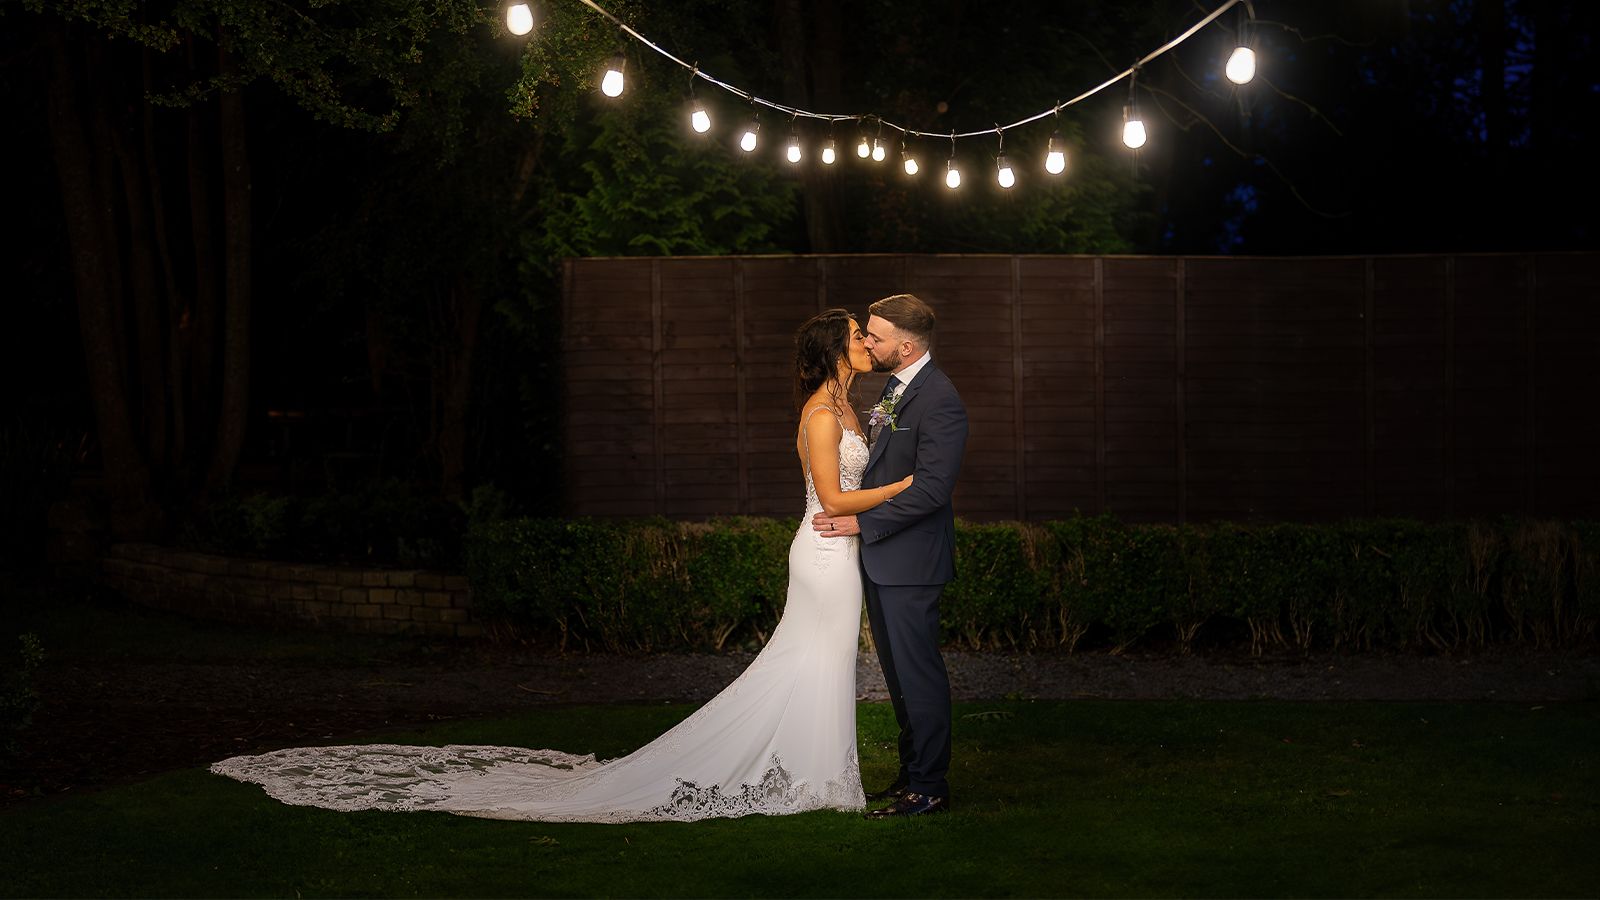 A newlywed couple kissing under string lights at night in a garden, surrounded by trees, with the bride in a long white gown and the groom in a suit.